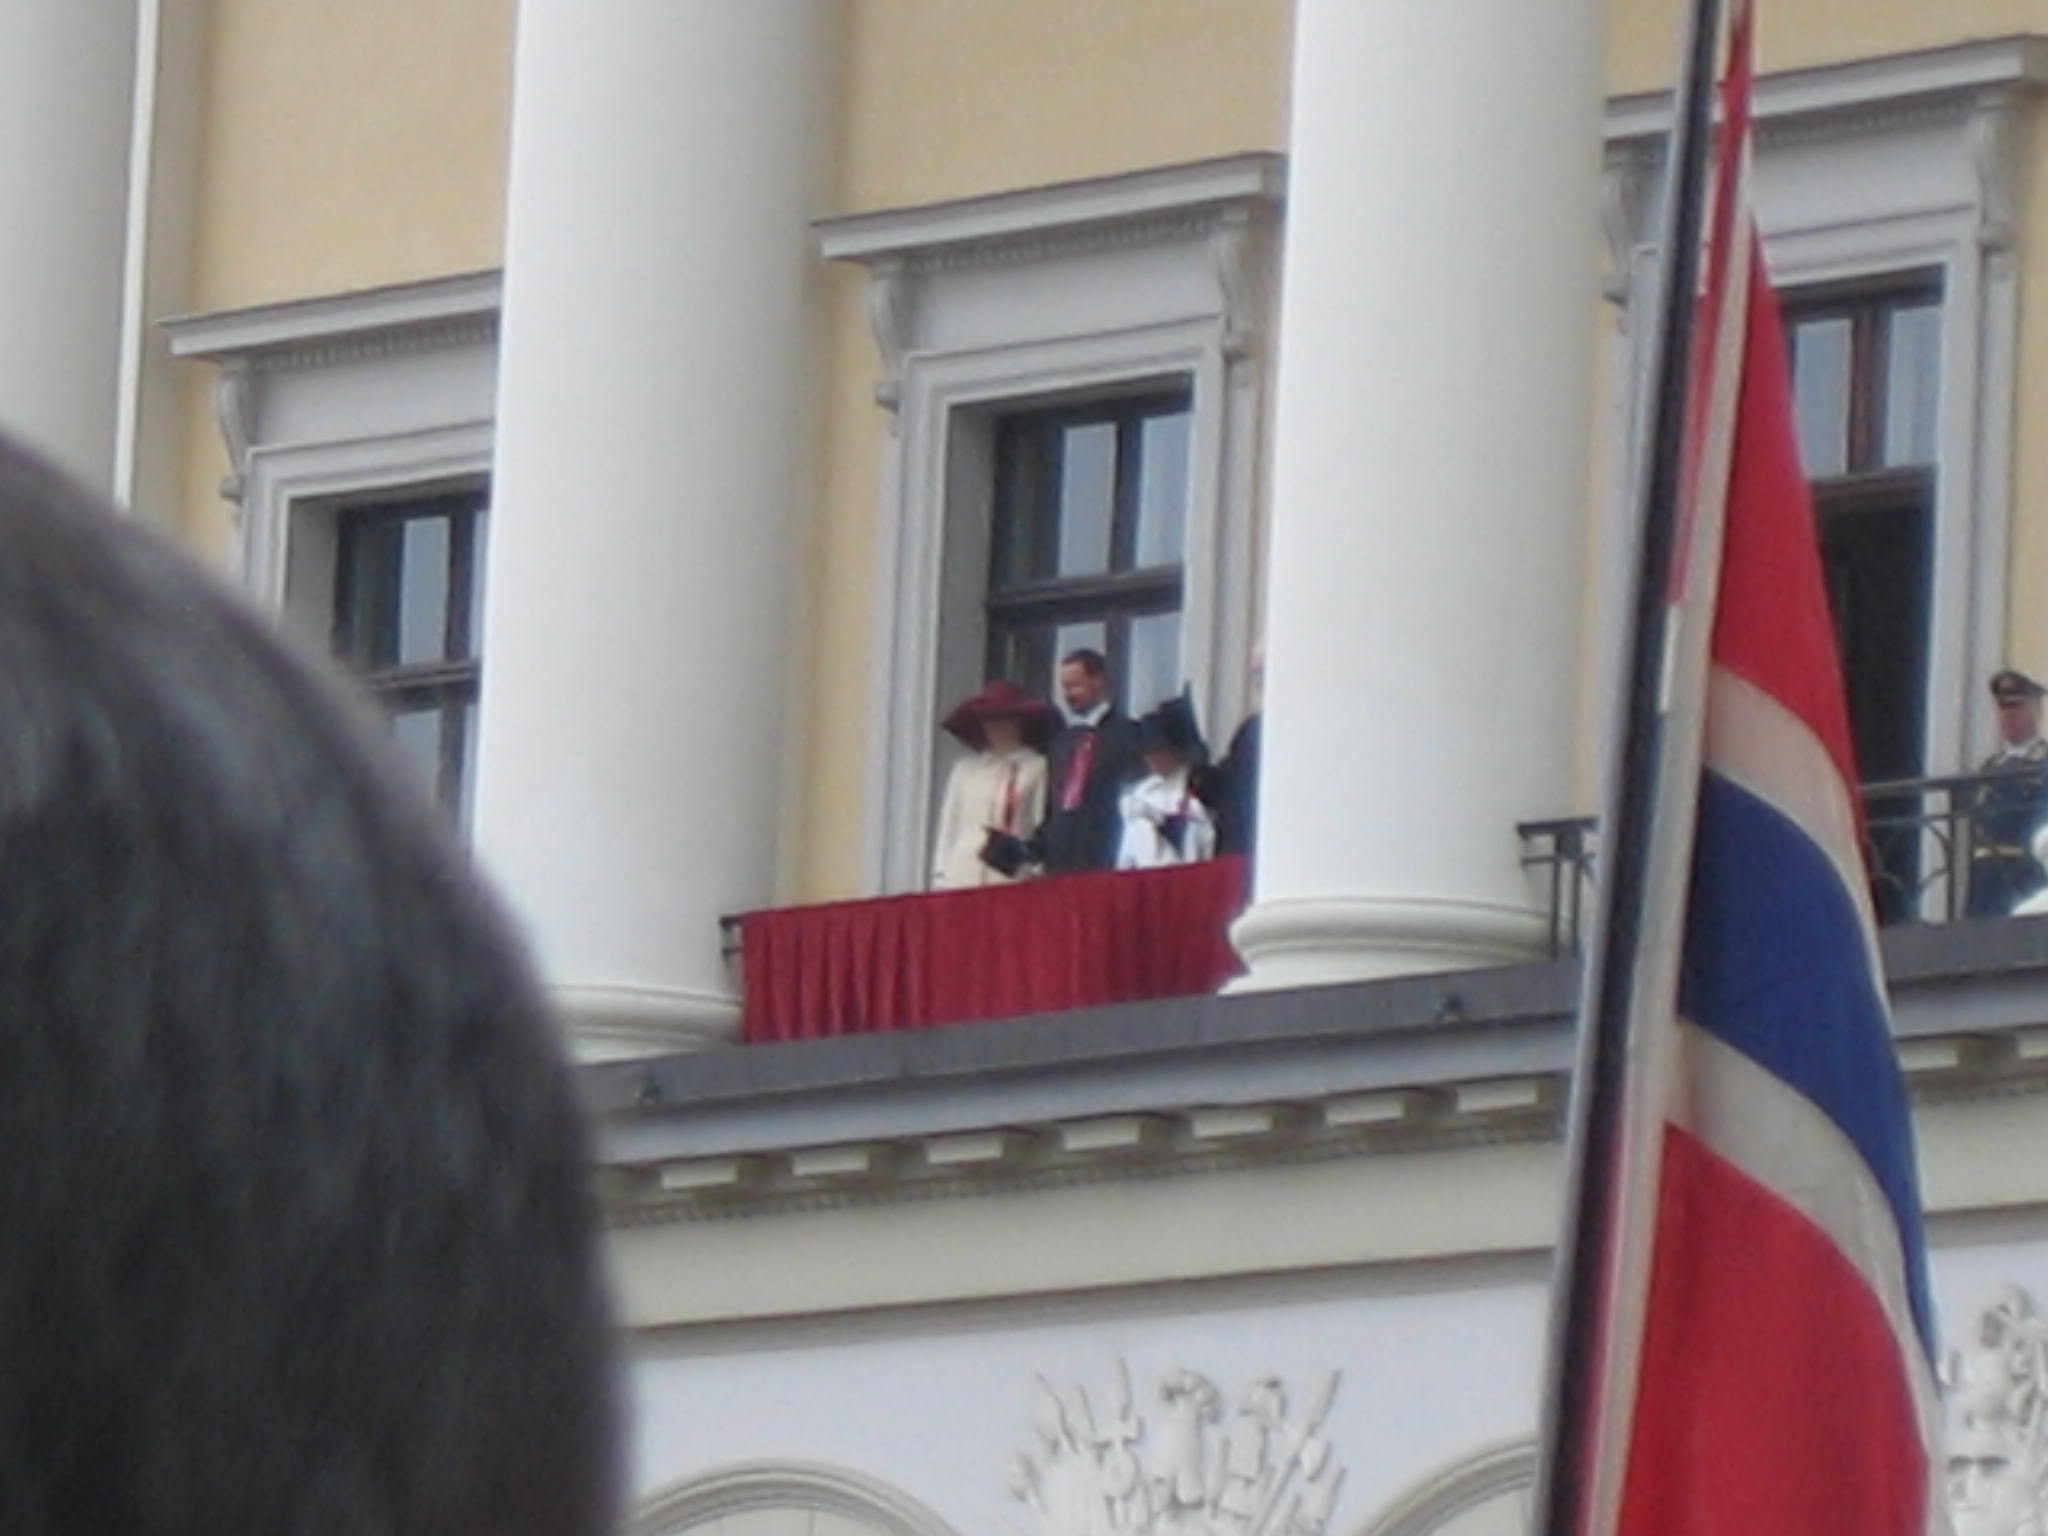 The Royal family waving from the palace on Karl Johans Gate